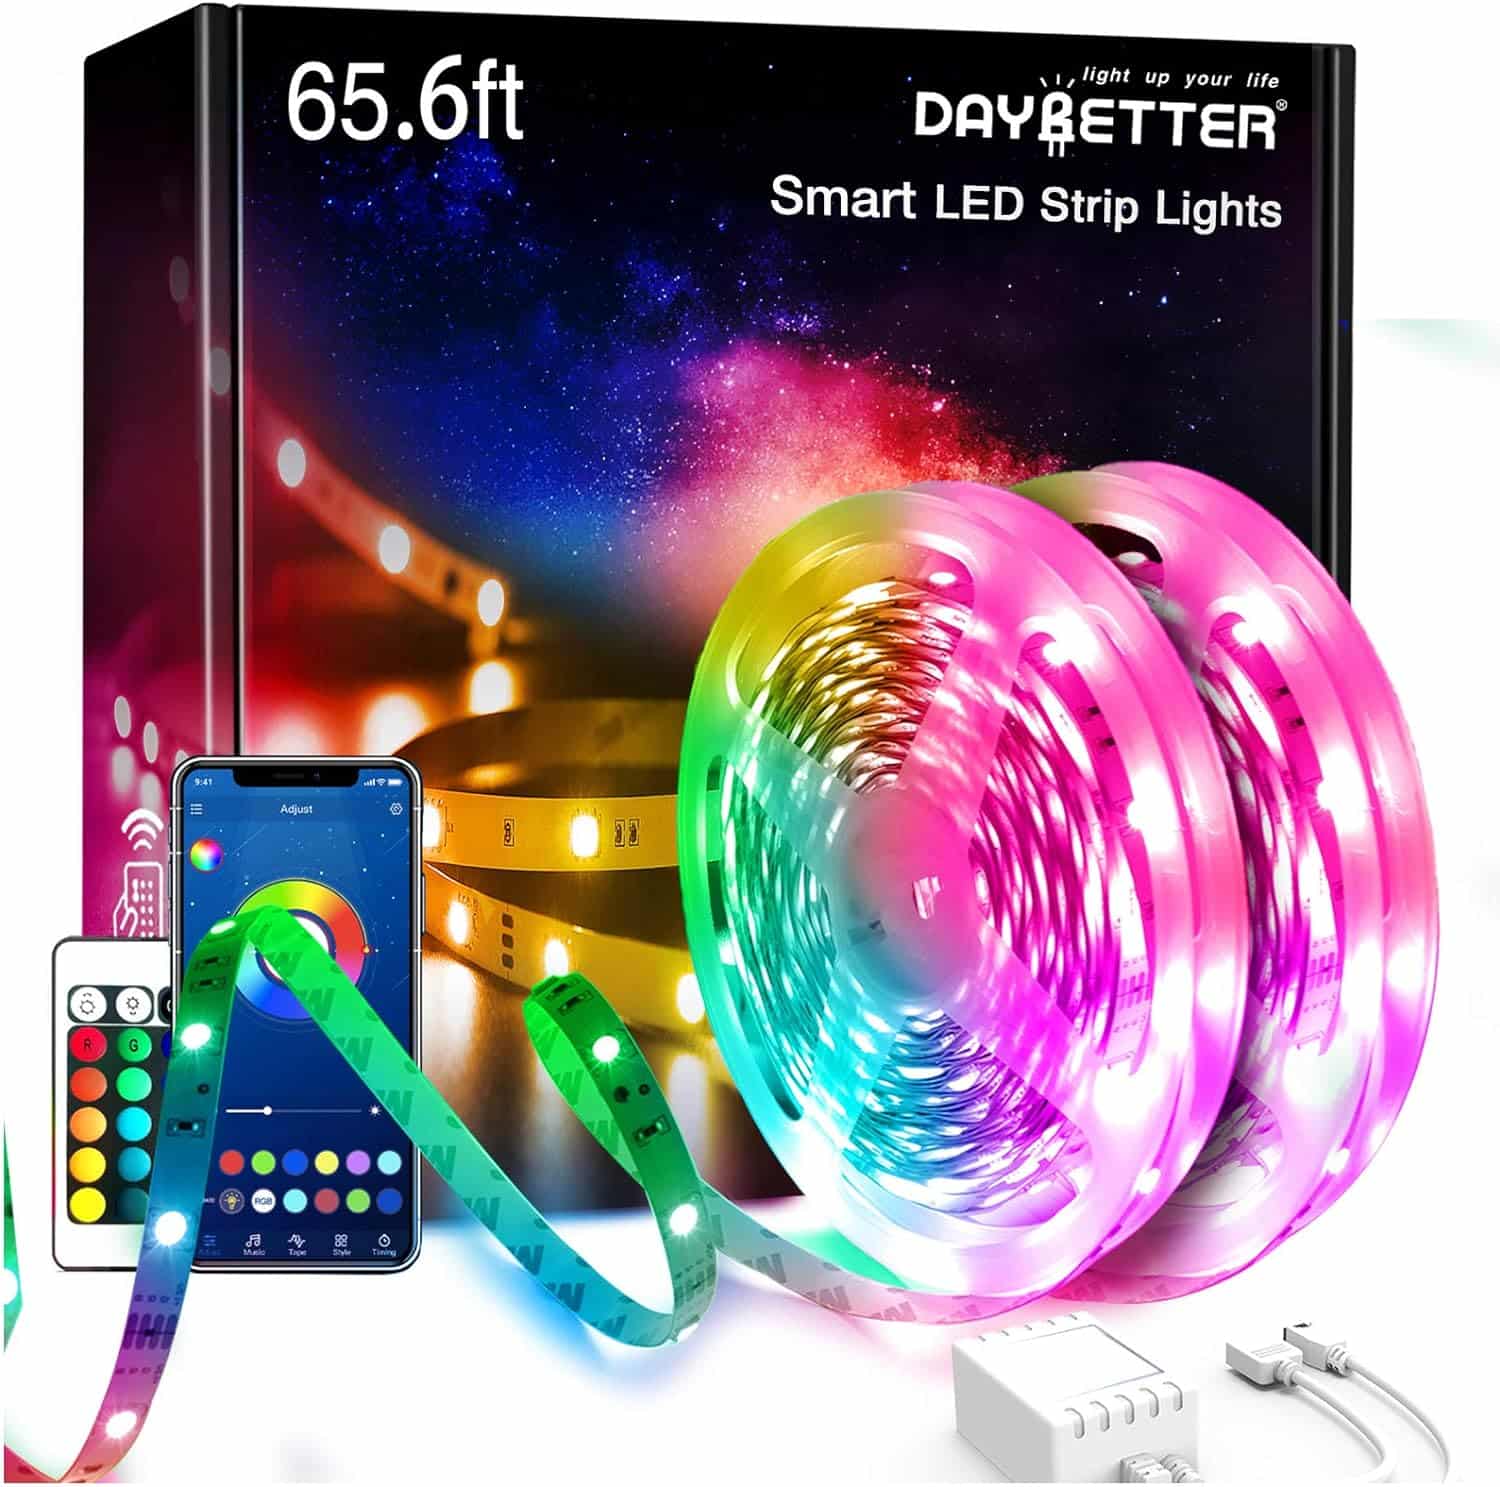 DAYBETTER Led Lights 100ft, 2 Rolls of 50ft Led Lights for Bedroom, Long Smart Led Strip Lights with Remote and App Control, Music Sync RGB Color Changing Led Light Strips for Room Decoration